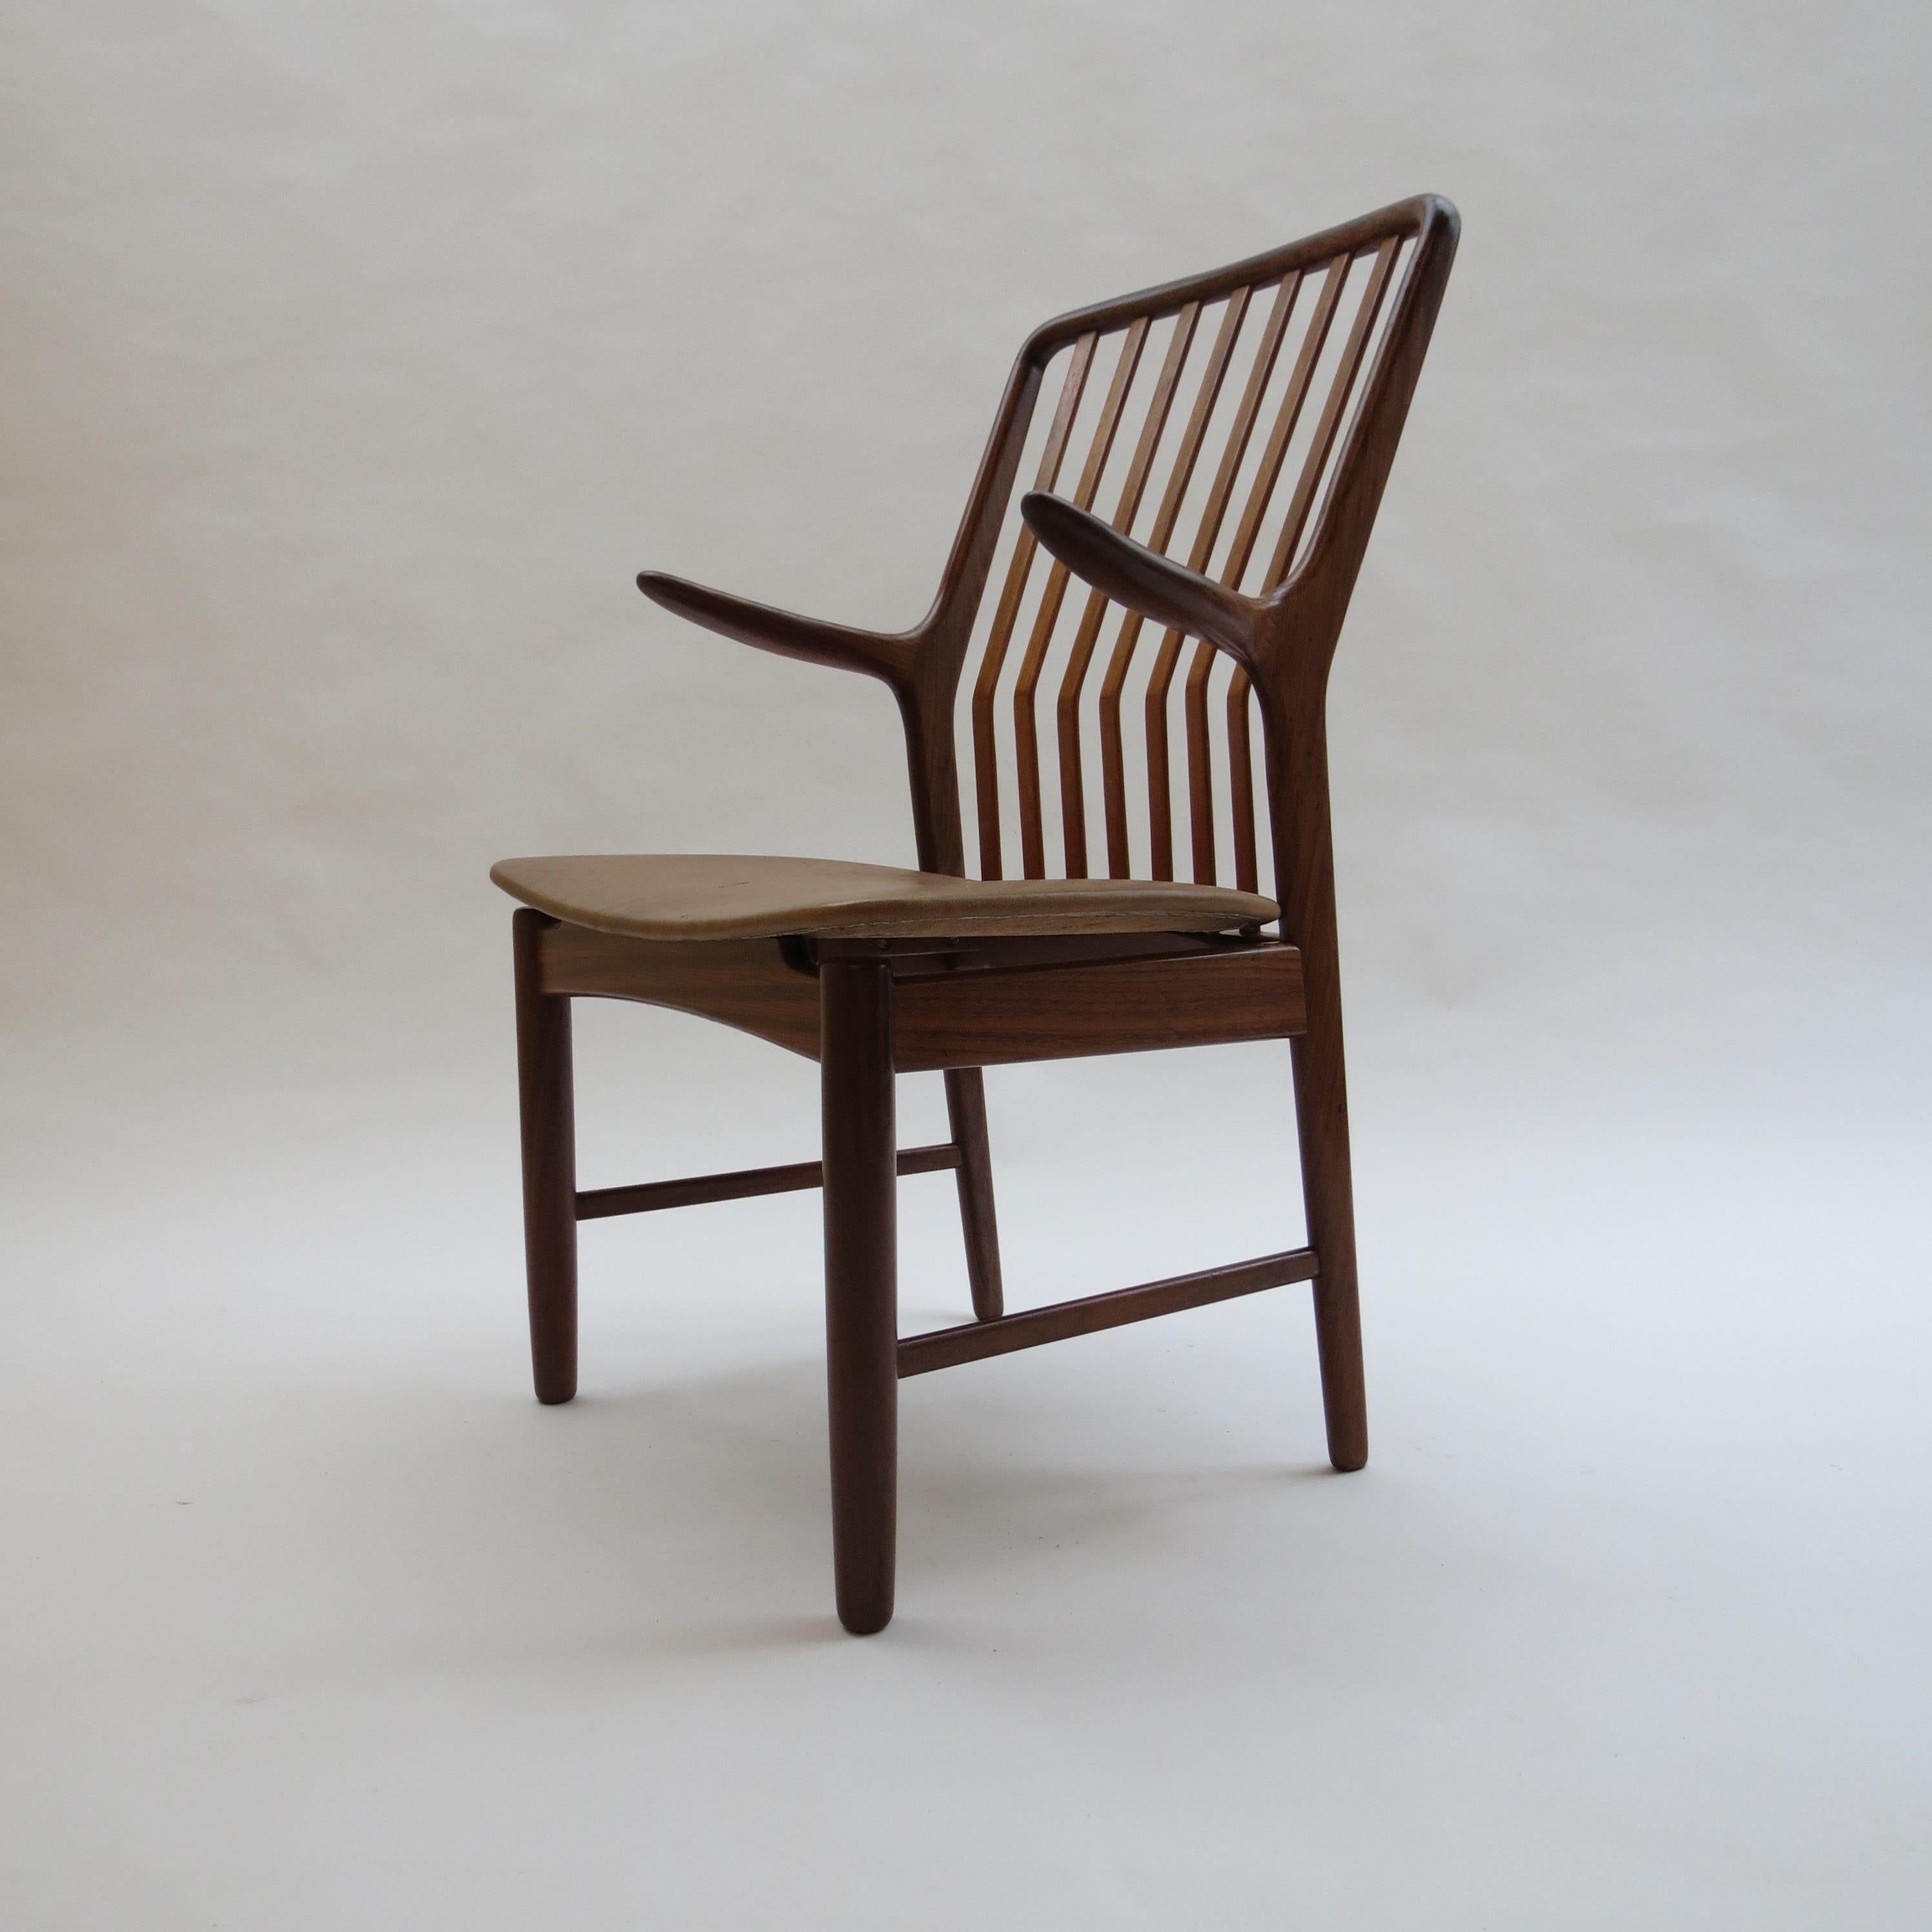 Midcentury Danish chair by Svend Madsen from the 1960s. Teak frame and newly reupholstered seat in vintage brown leather.

Designed by Svend Madsen Denmark.

In good condition, the seat has recently been reupholstered with vintage leather.